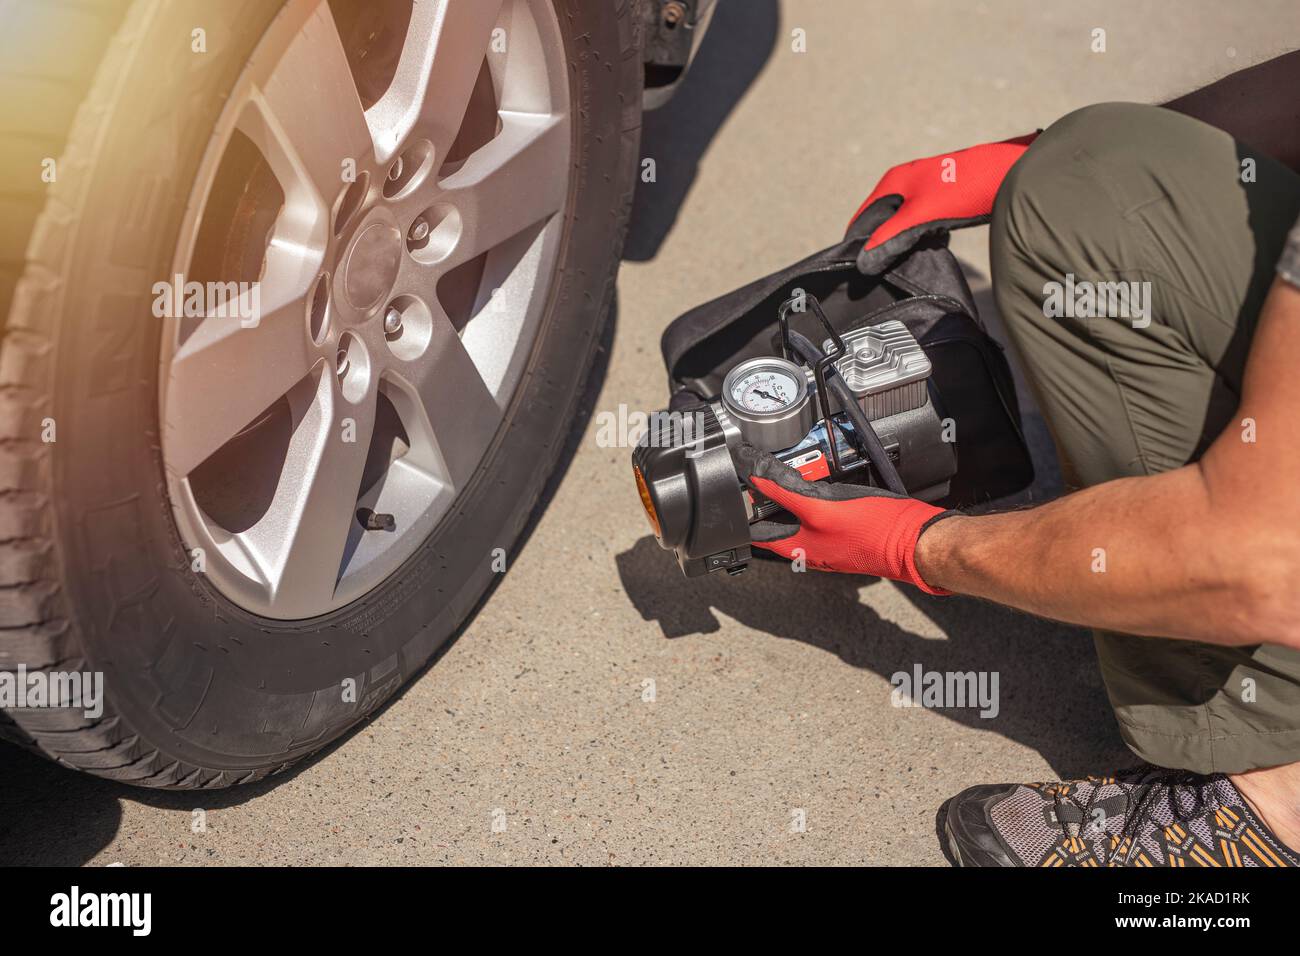 Male hands in glove and portable tire pump for inflating auto wheel. Tyre inflator air compressor with pressure gauge. Stock Photo